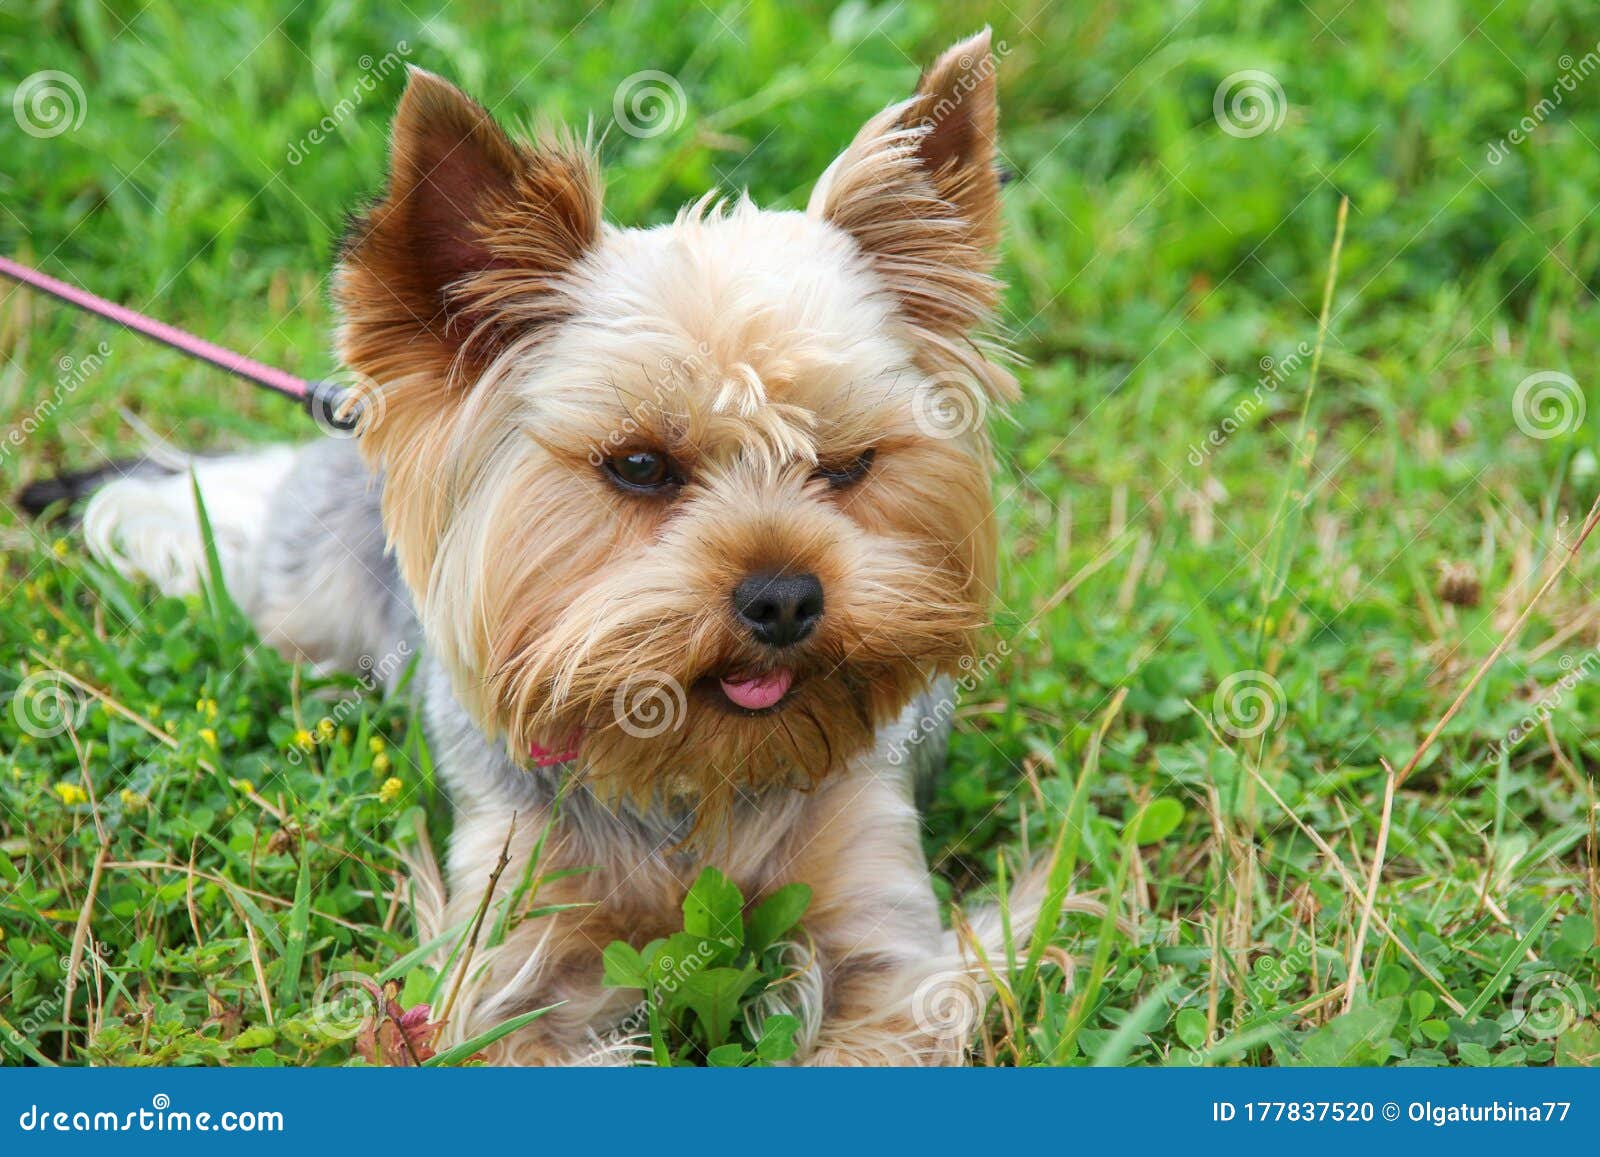 a cute purebred young yorkshire terrier with beautiful hair cutting and emphatic expressive eyes